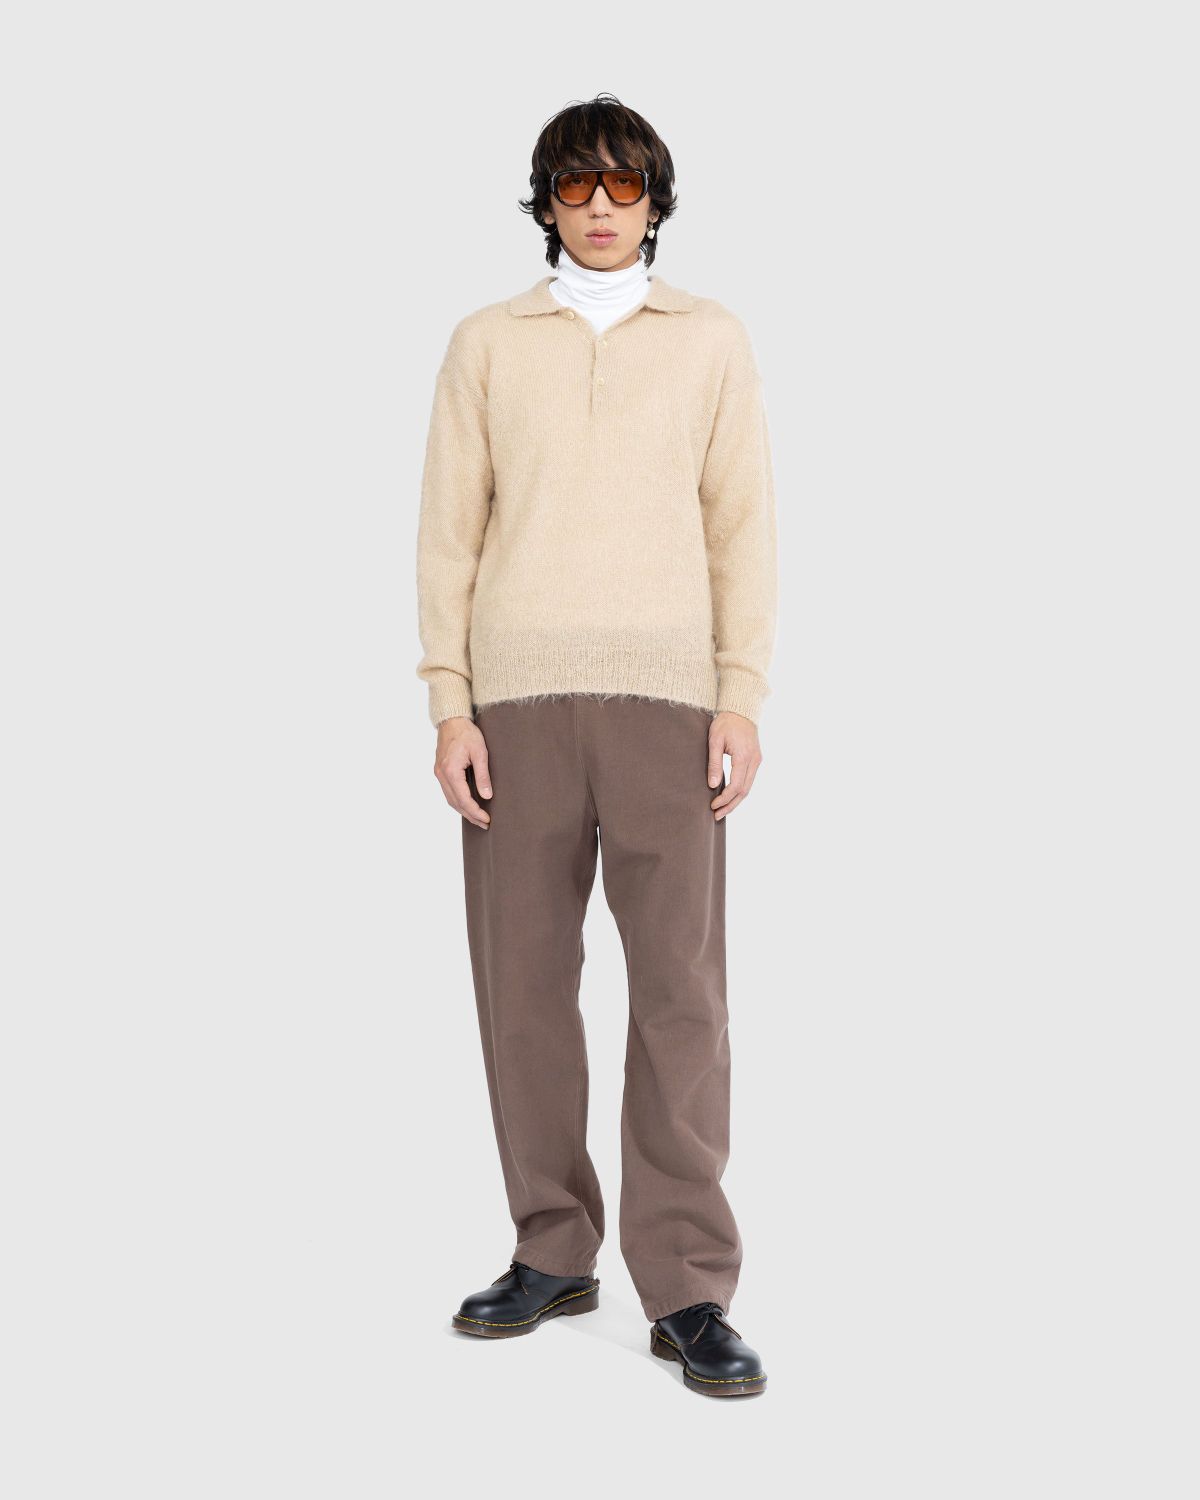 Auralee – Brushed Mohair Knit Polo Beige | Highsnobiety Shop